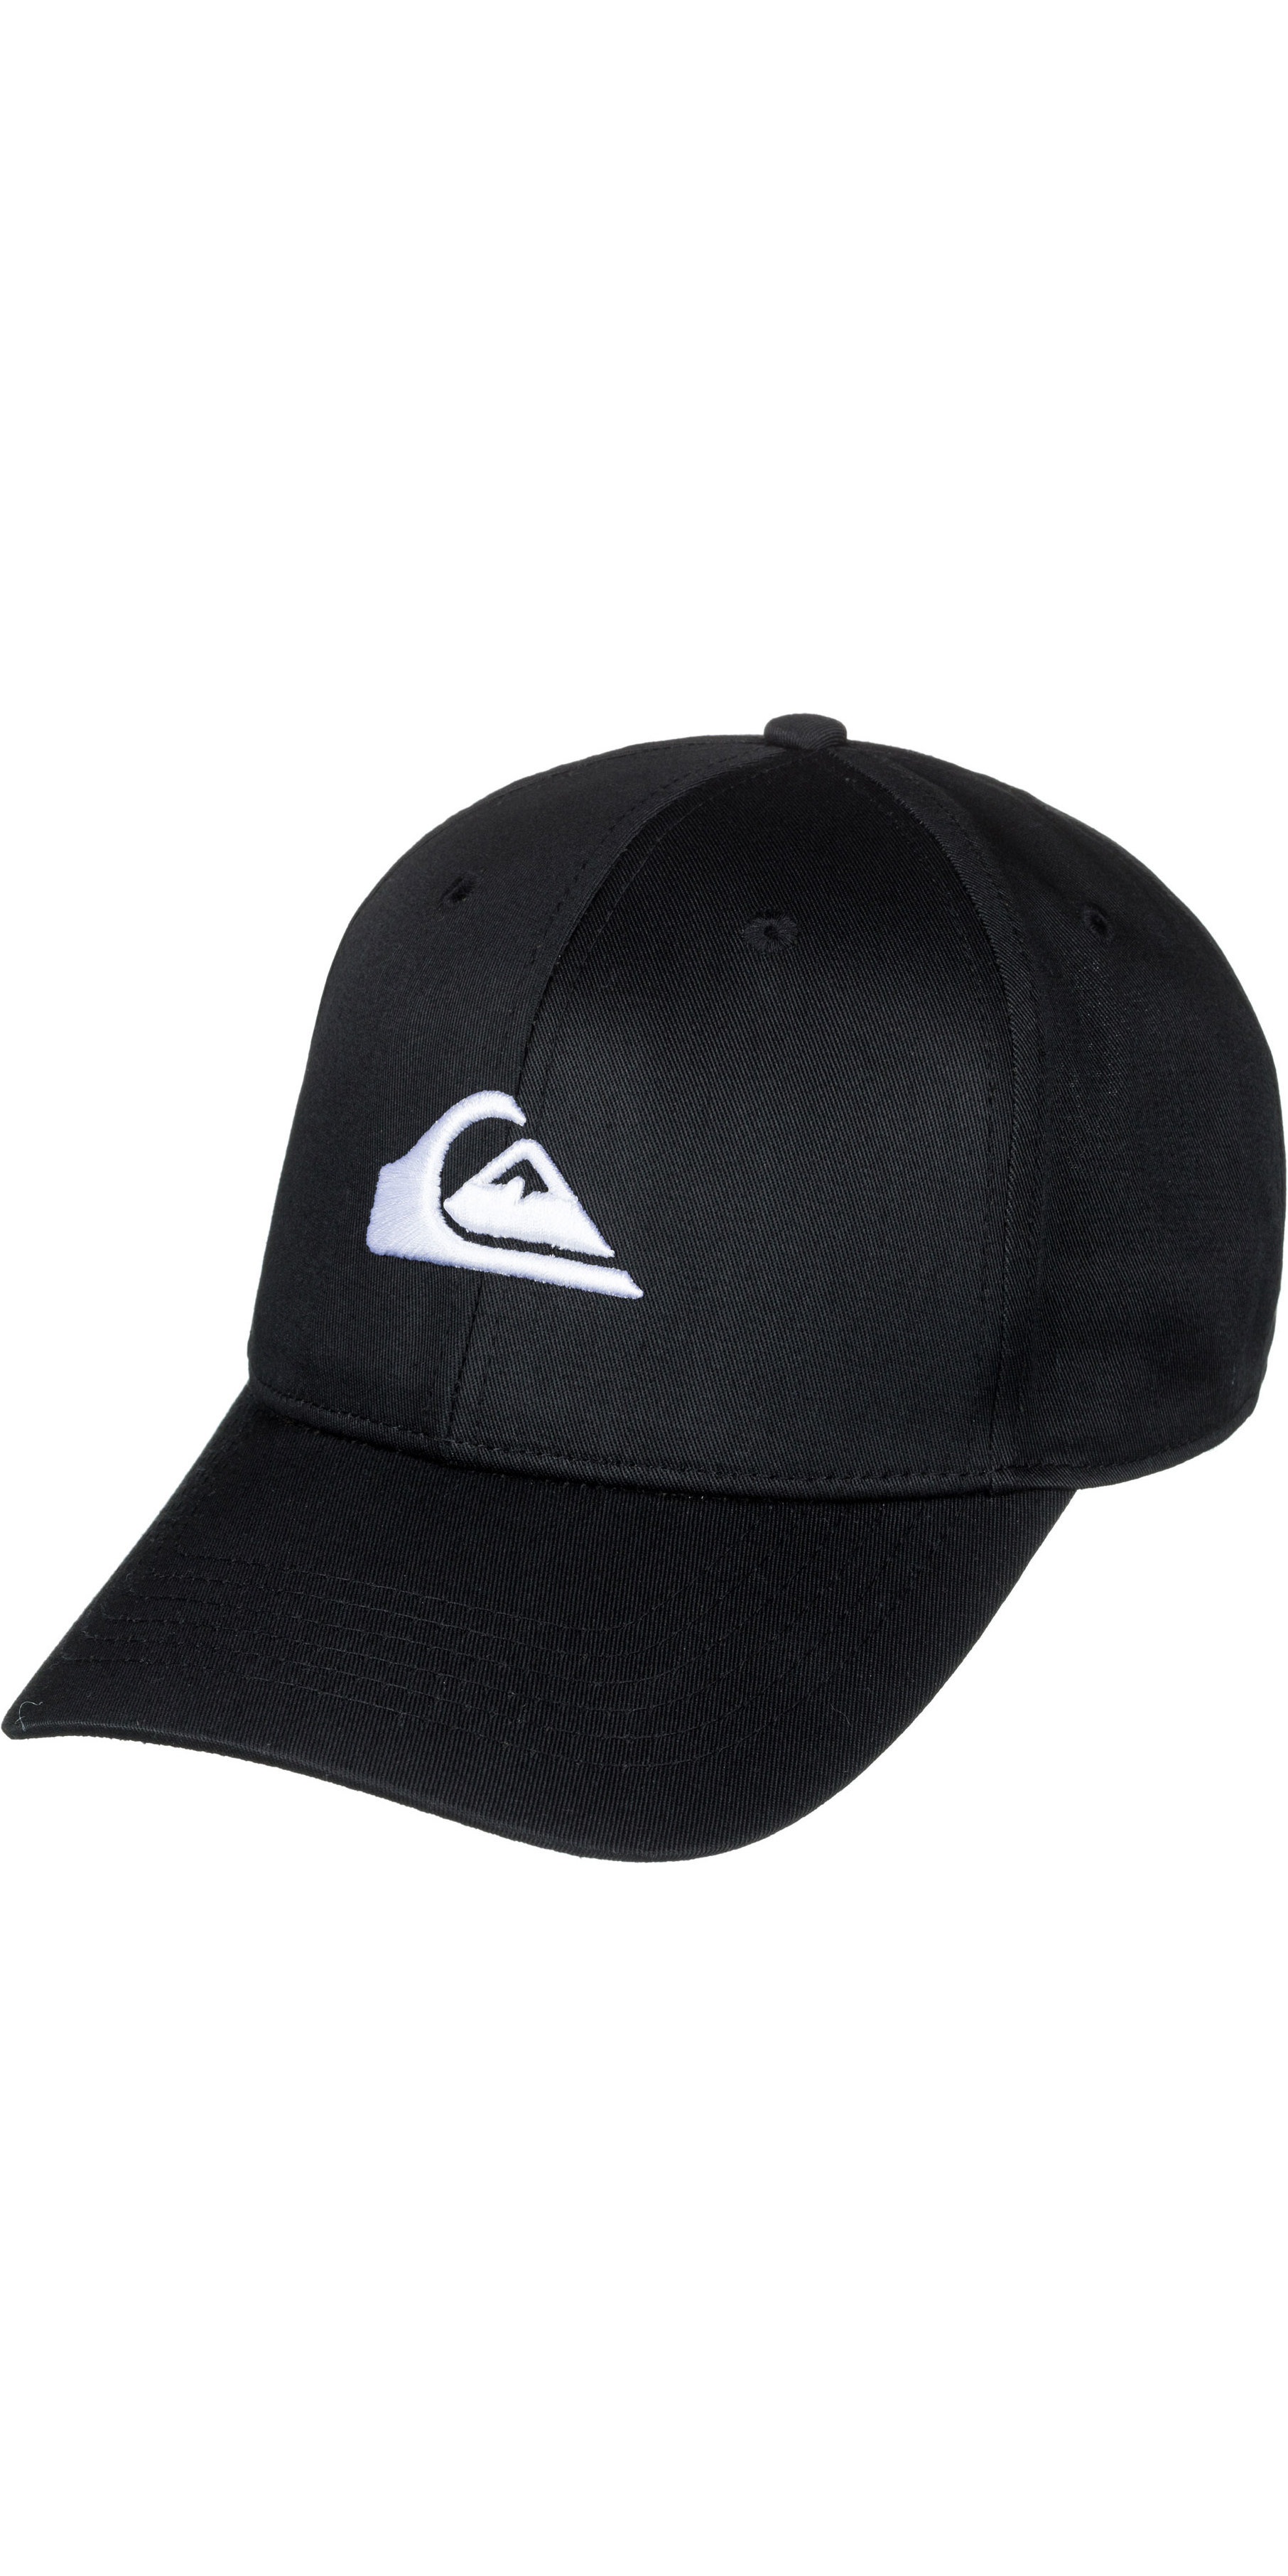 AQYHA04002 Sailing Decades Snapback - - Watersports Quiksilver Black Accessories 2019 | Cap Outlet